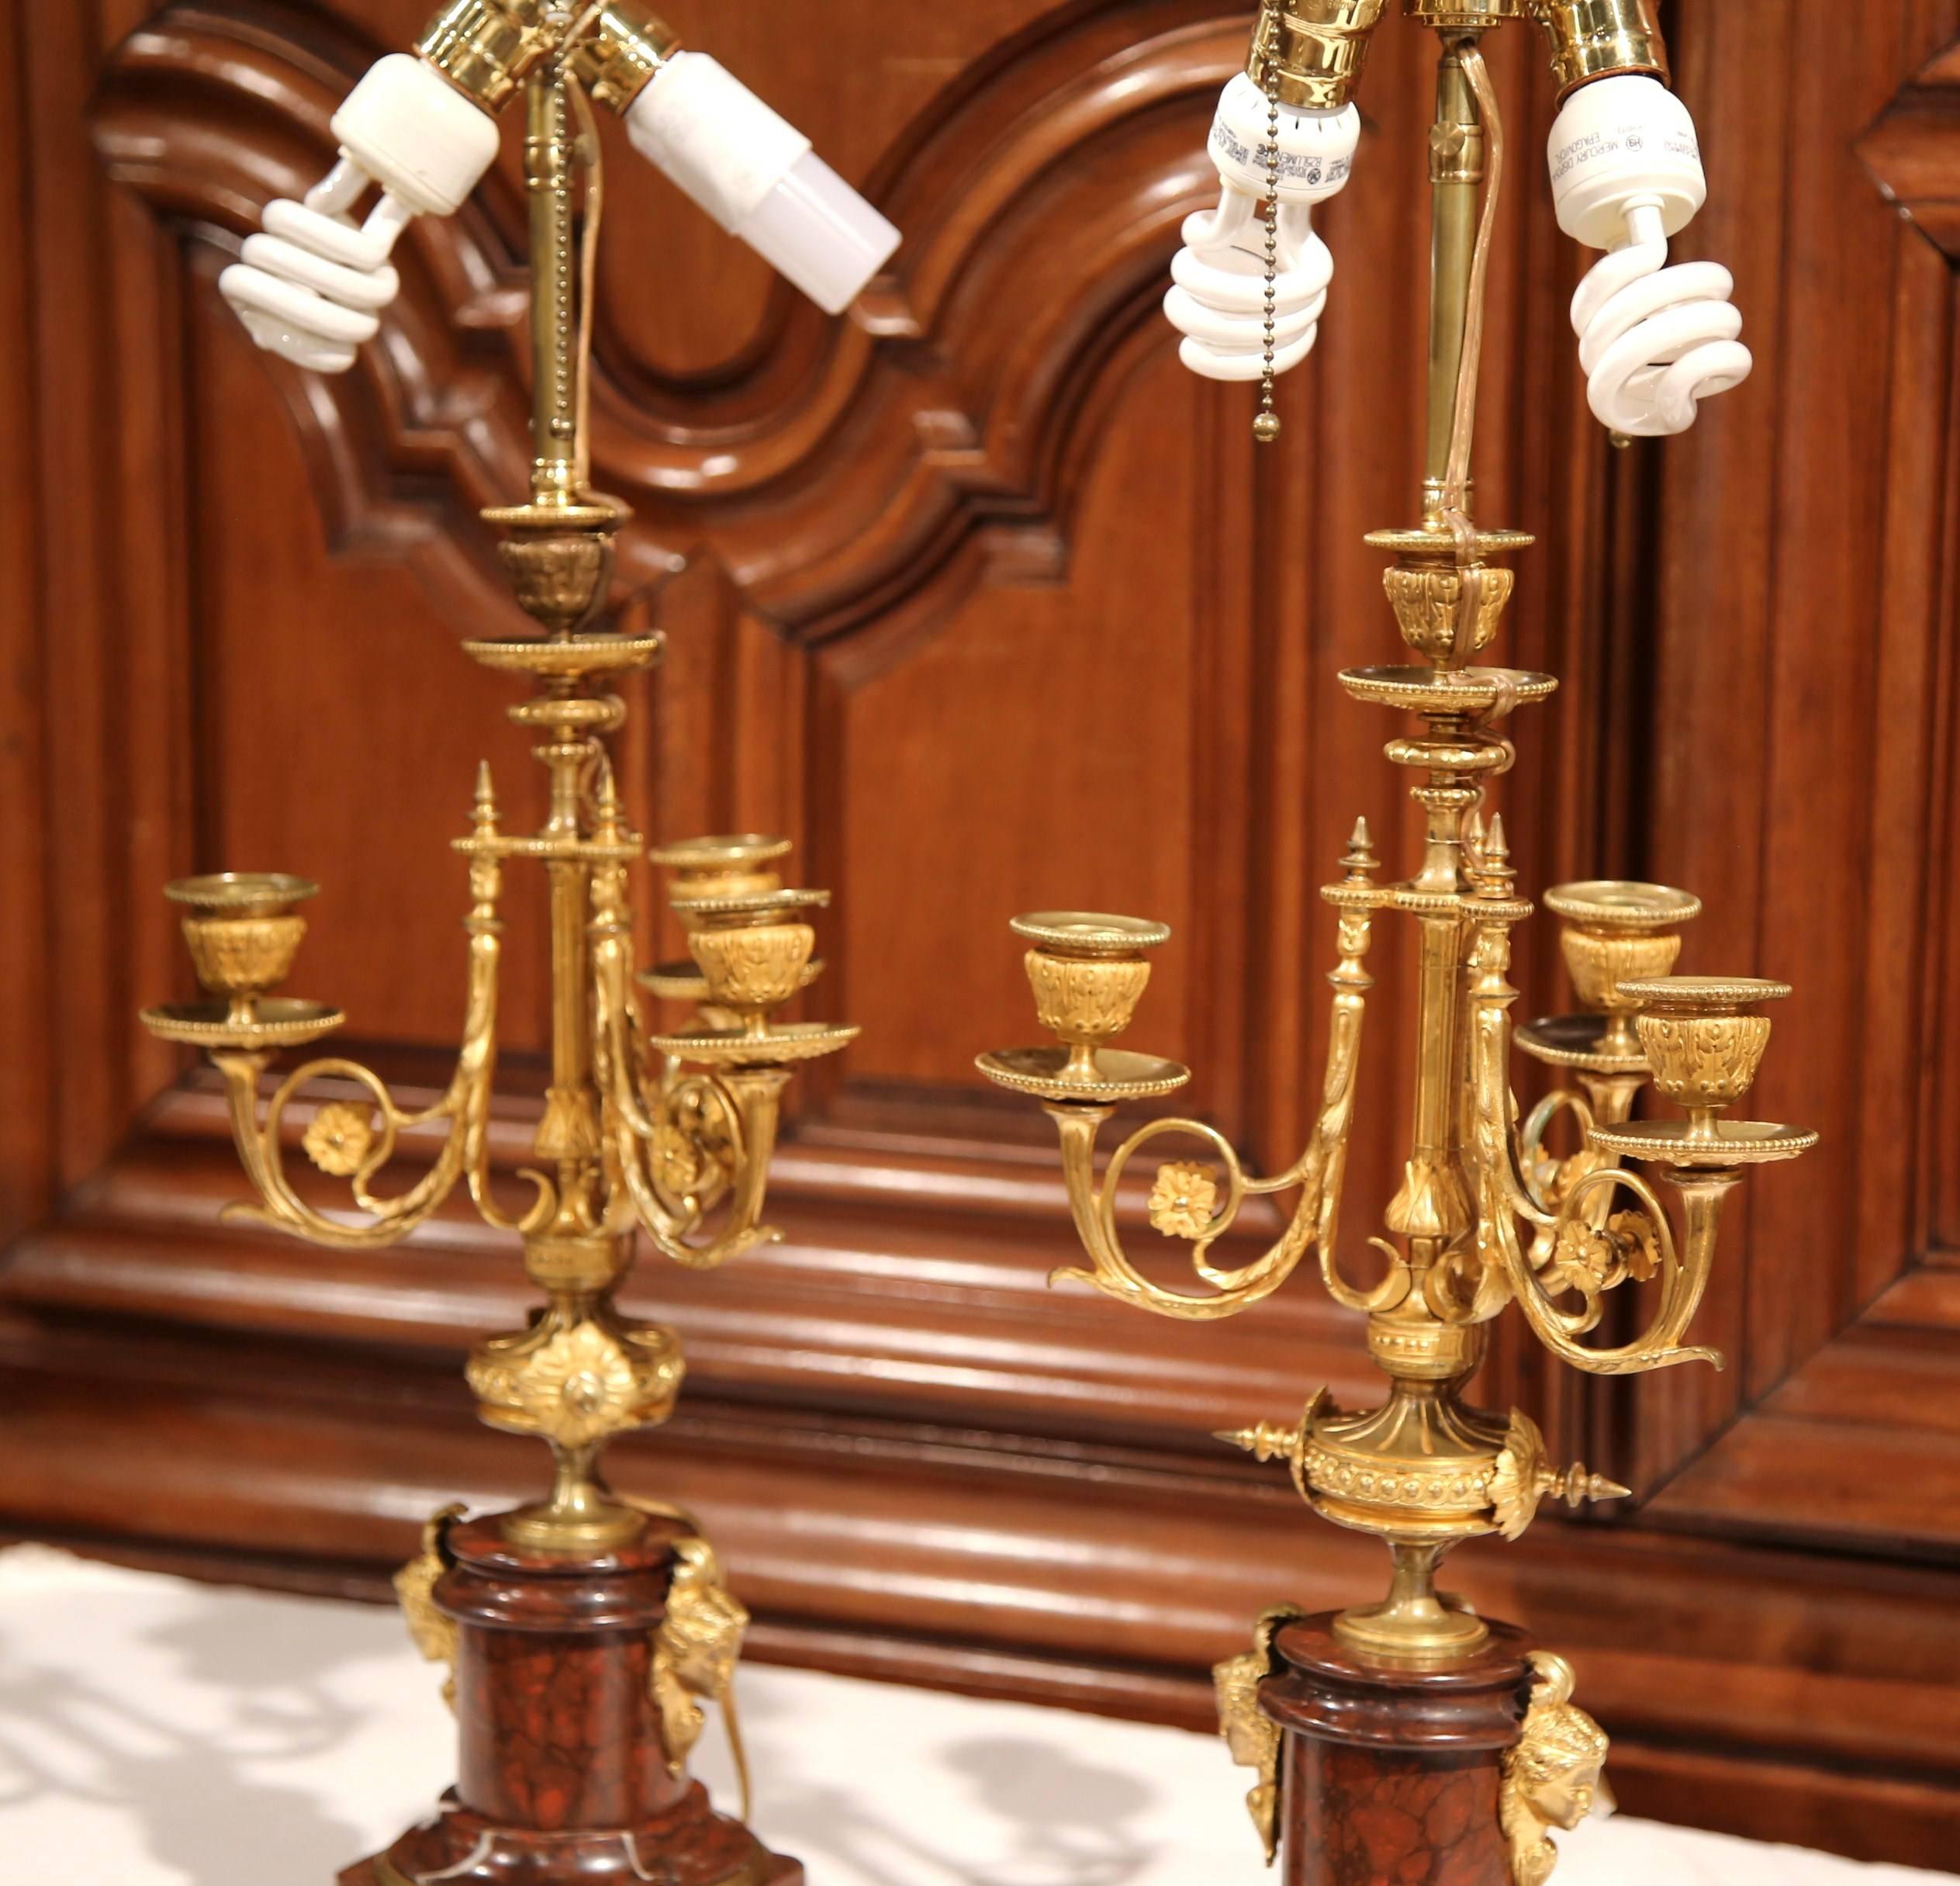 Napoleon III Pair of 19th Century French Bronze and Marble Three-Light Candelabra Lamps